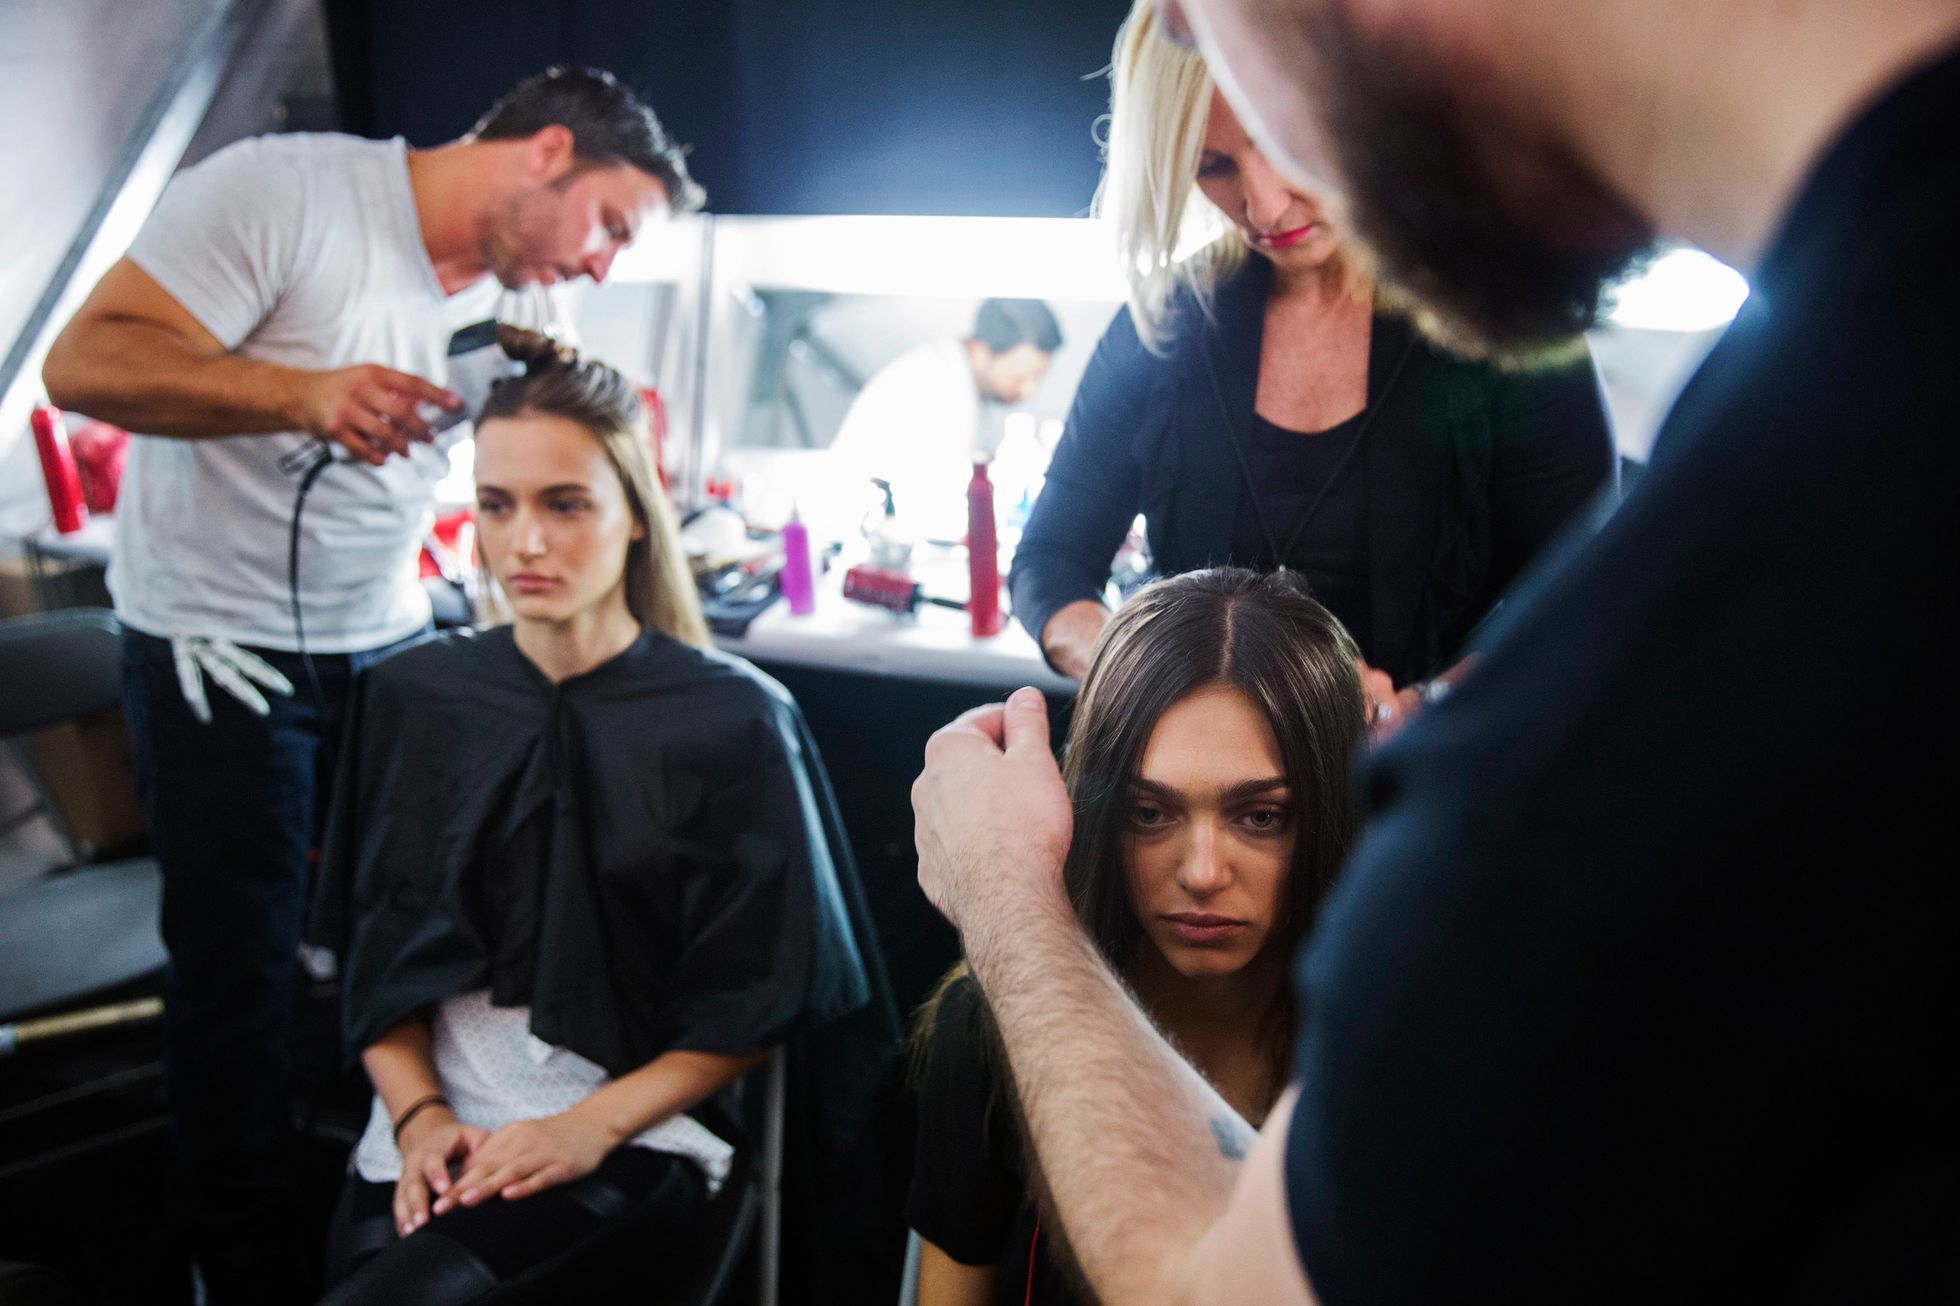 Models have their hair done backstage before presenting the BCBG Max Azria collection during New York Fashion Week